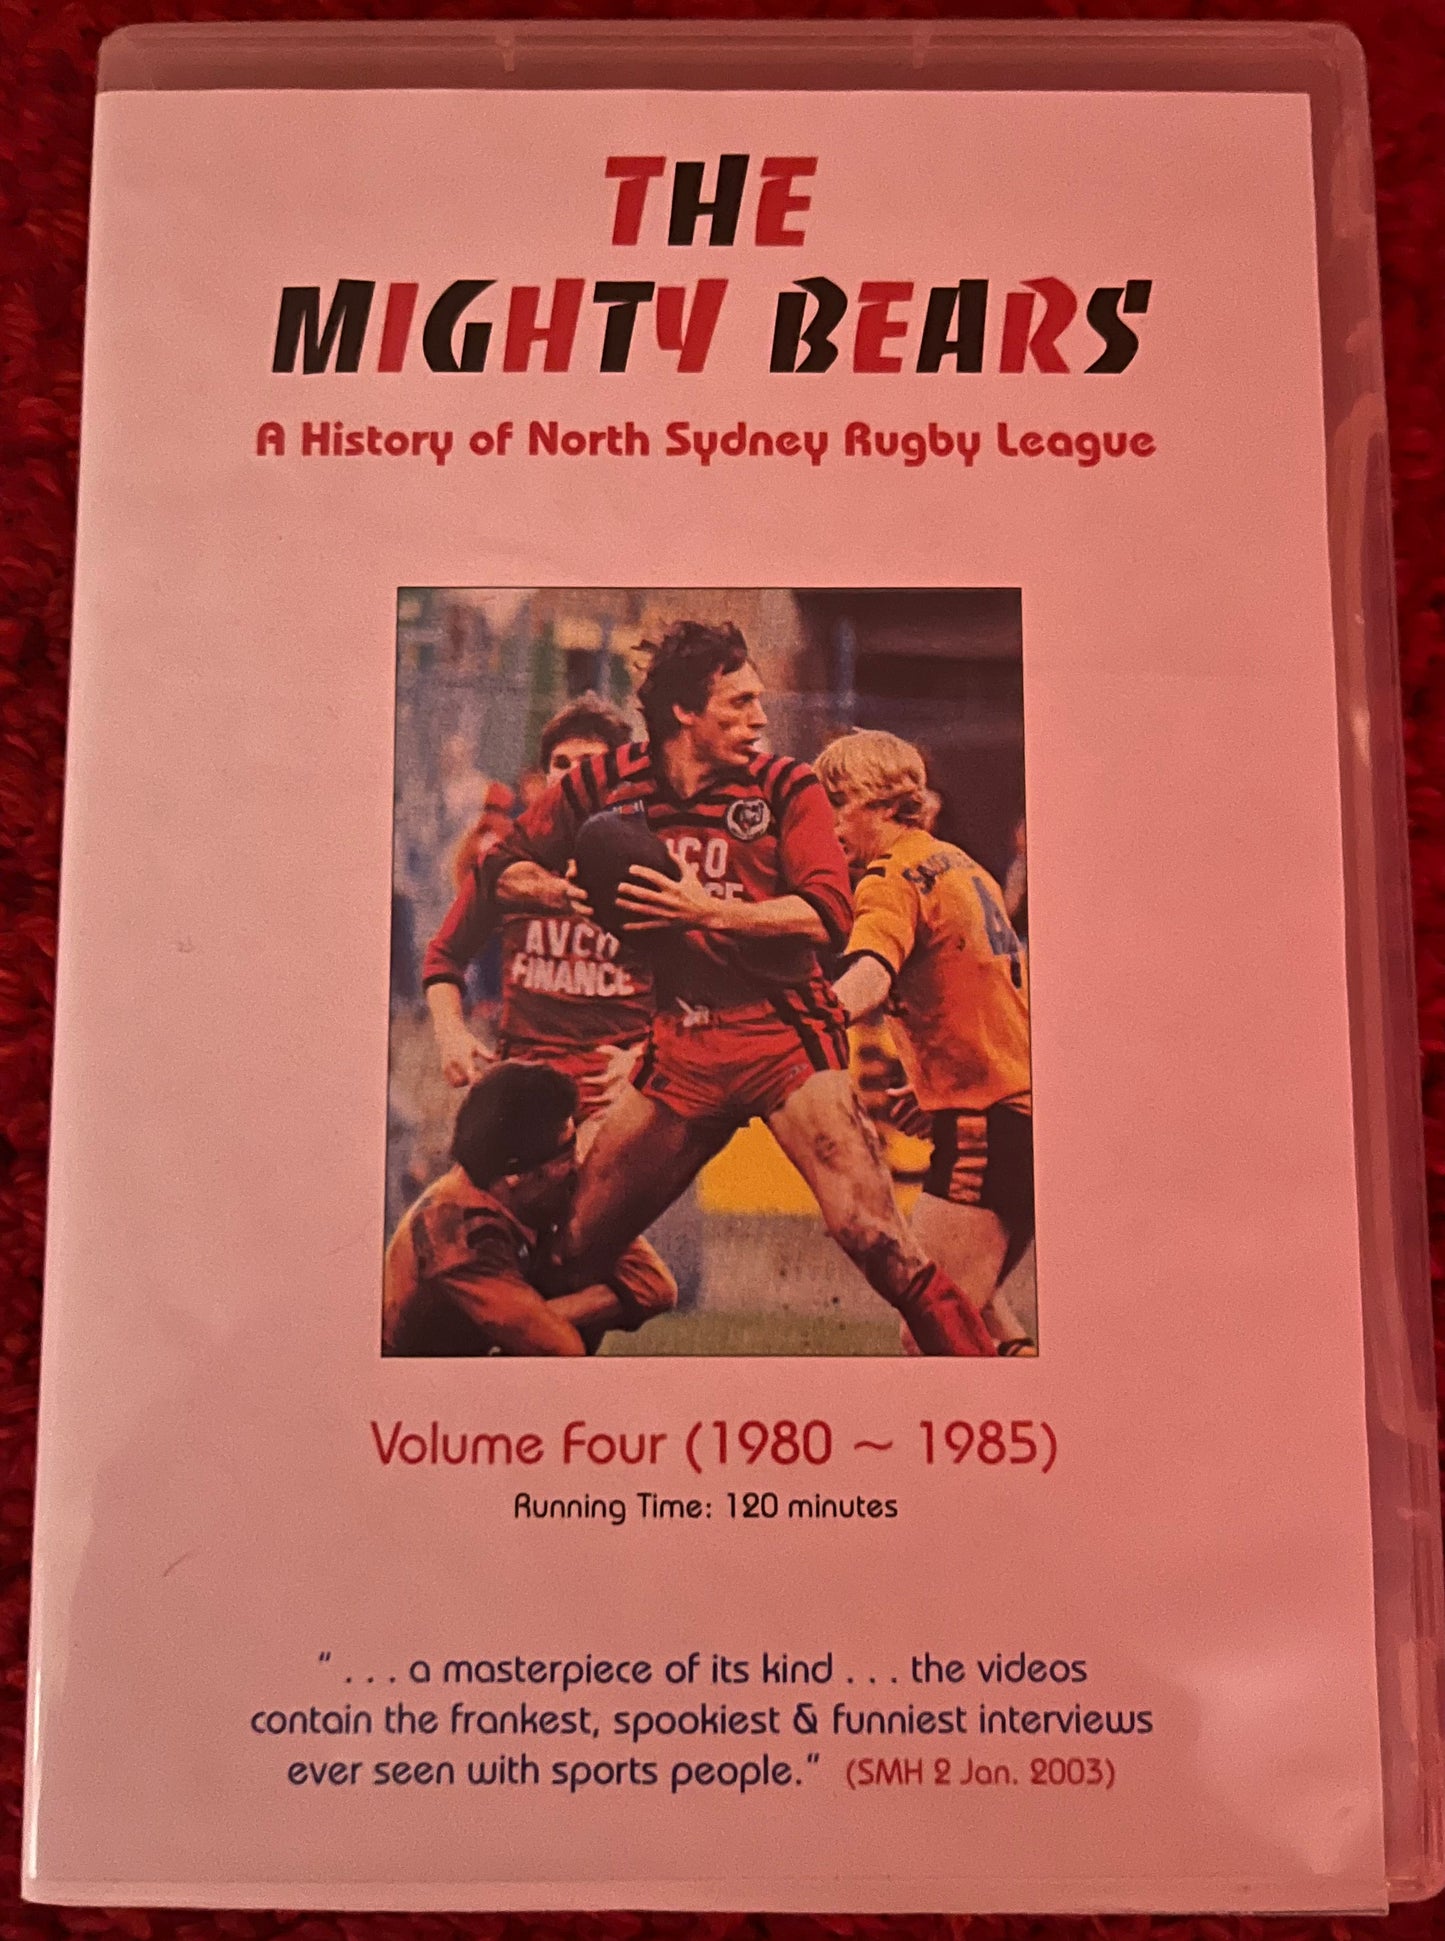 The Mighty Bears - Volume 4 (1980 - 1985)